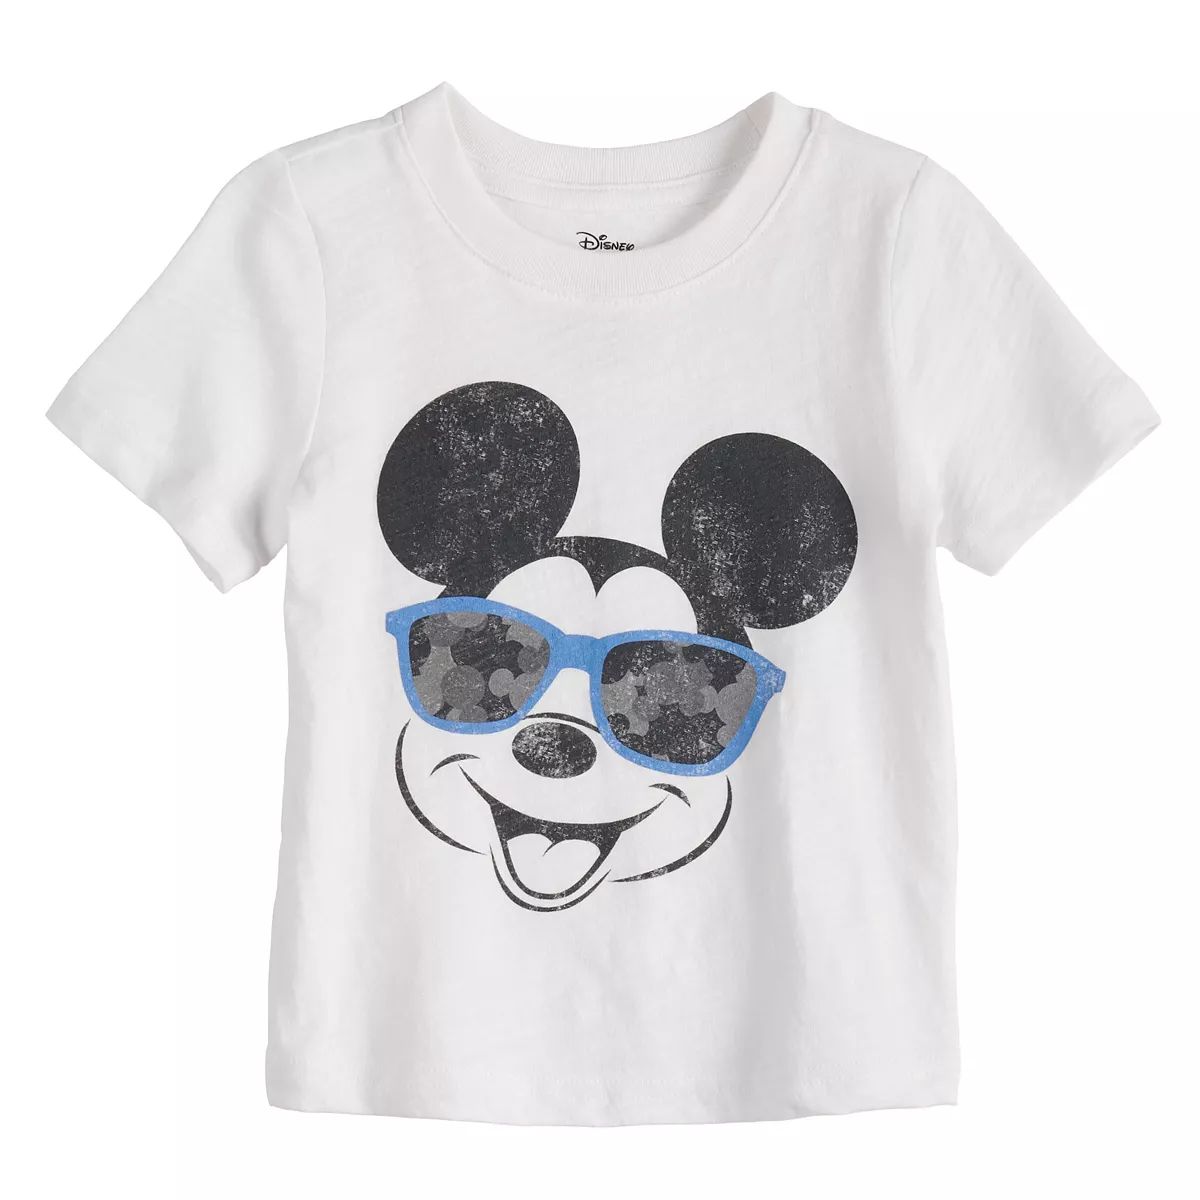 Disney's Mickey Mouse Baby Boy Graphic Tee by Jumping Beans® | Kohl's